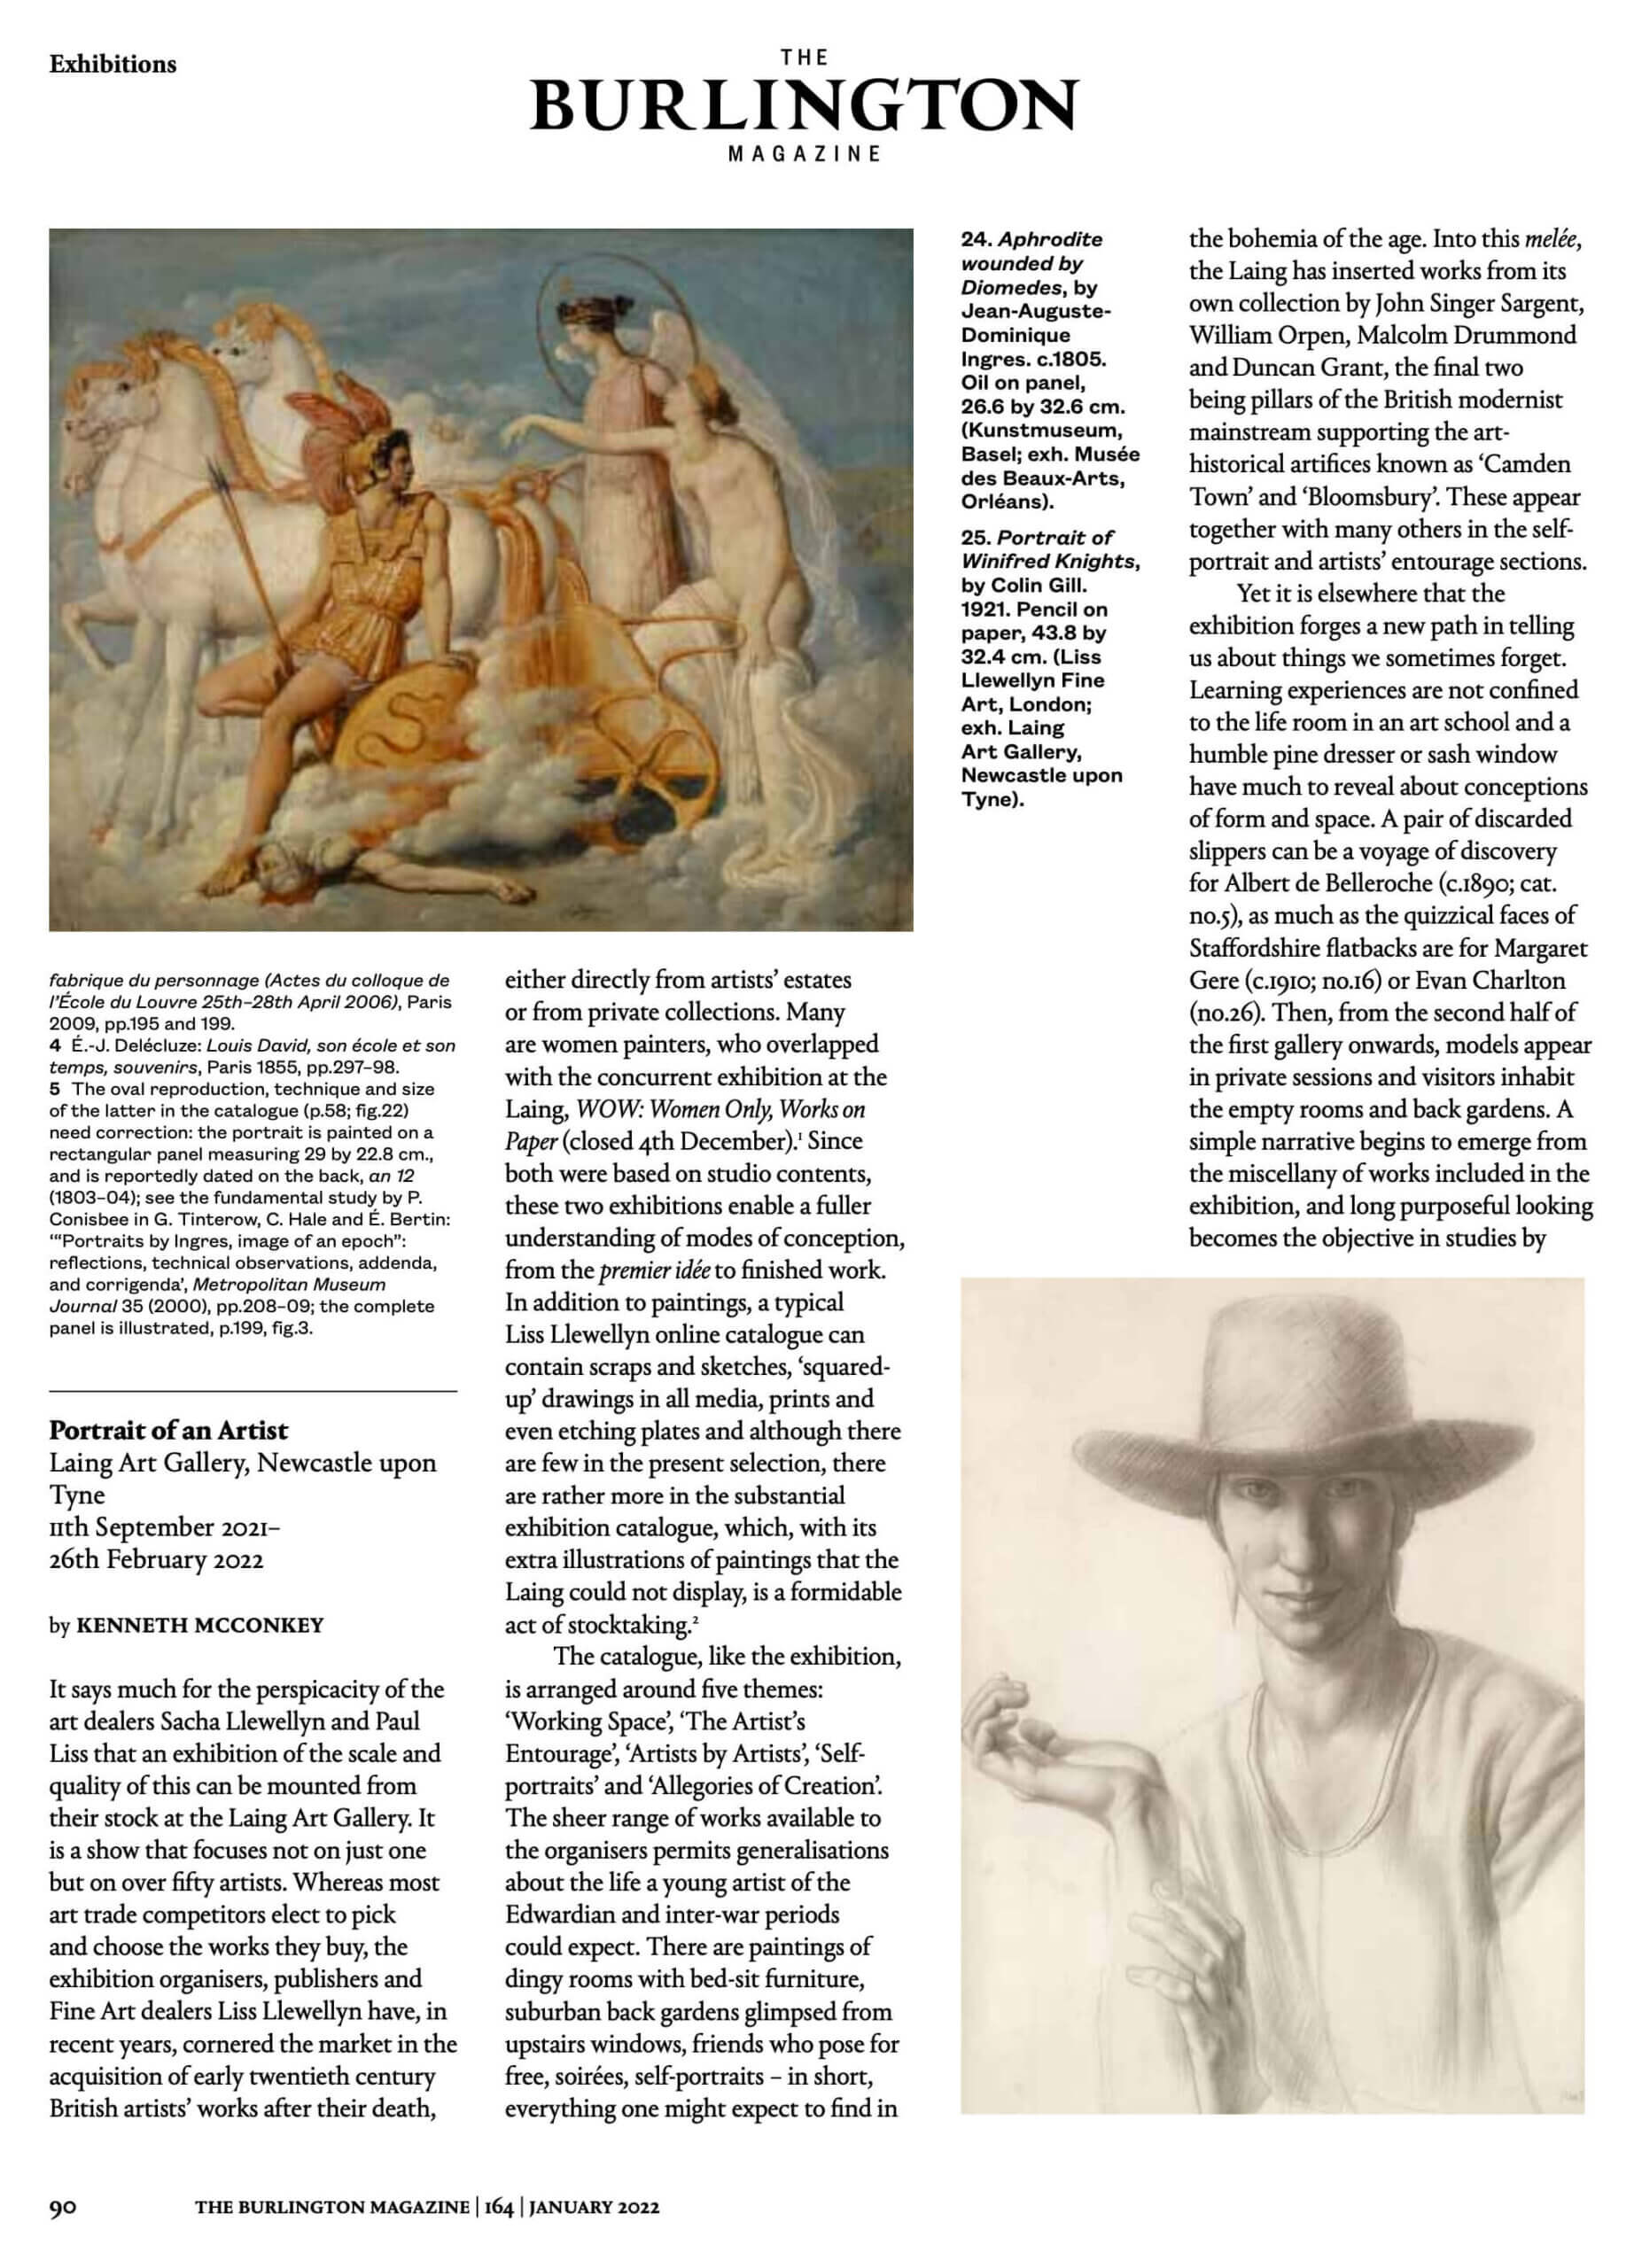 Kenneth McConkey - Exhibition Review for Portrait of an Artist - Page 1